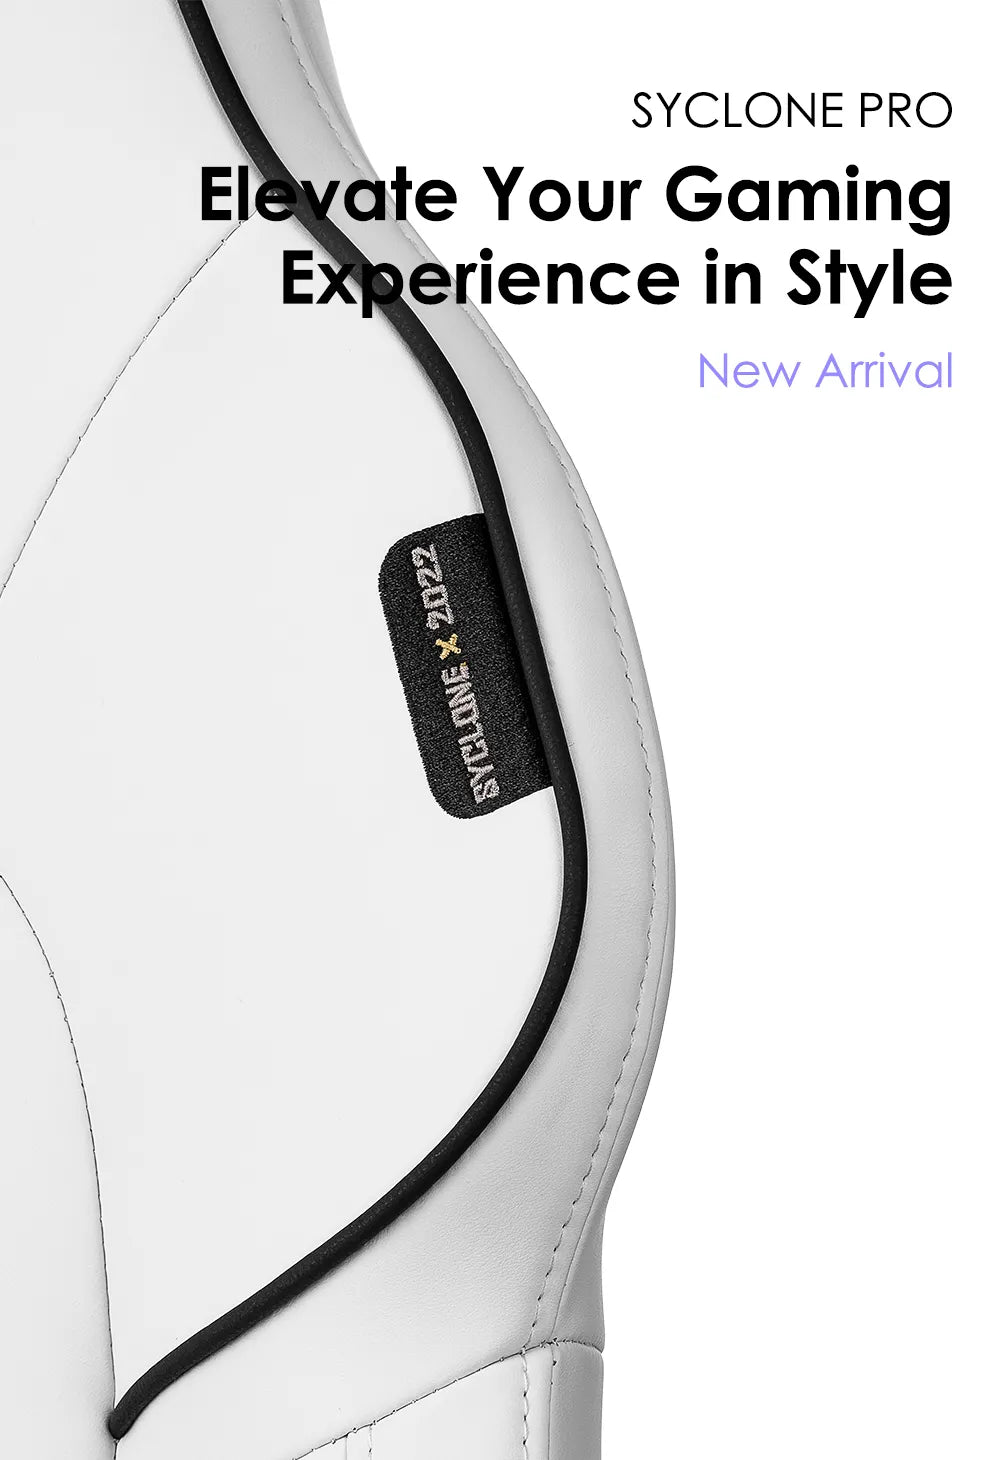 Detail of the white SYCLONE PRO gaming chair's side stitching and label.